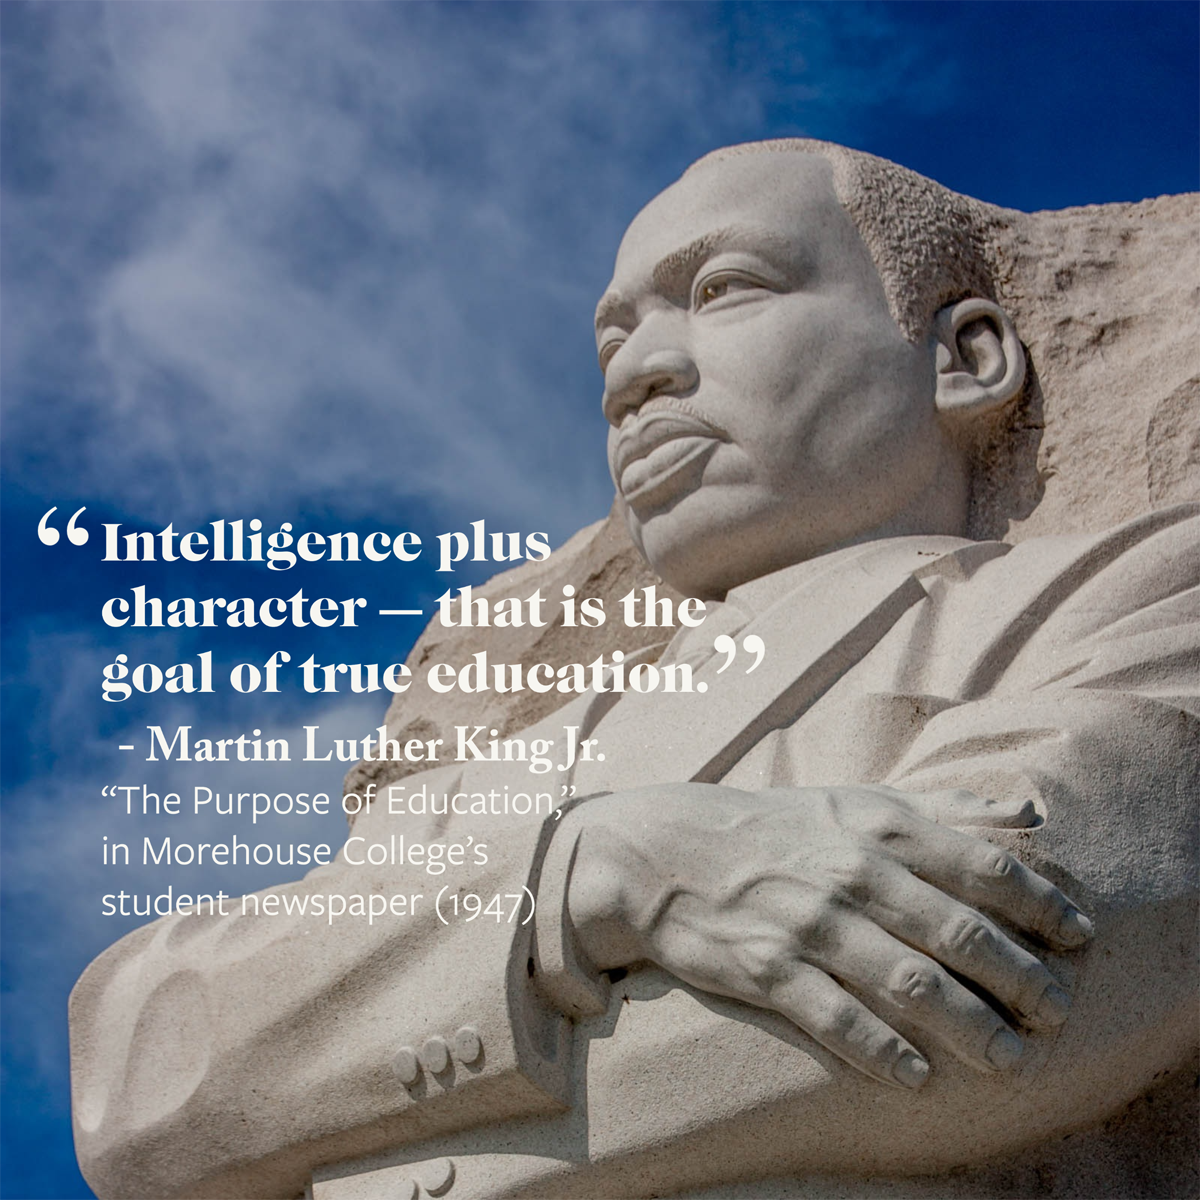 MLK quote: "Intelligence plus character - that is the goal of true education."